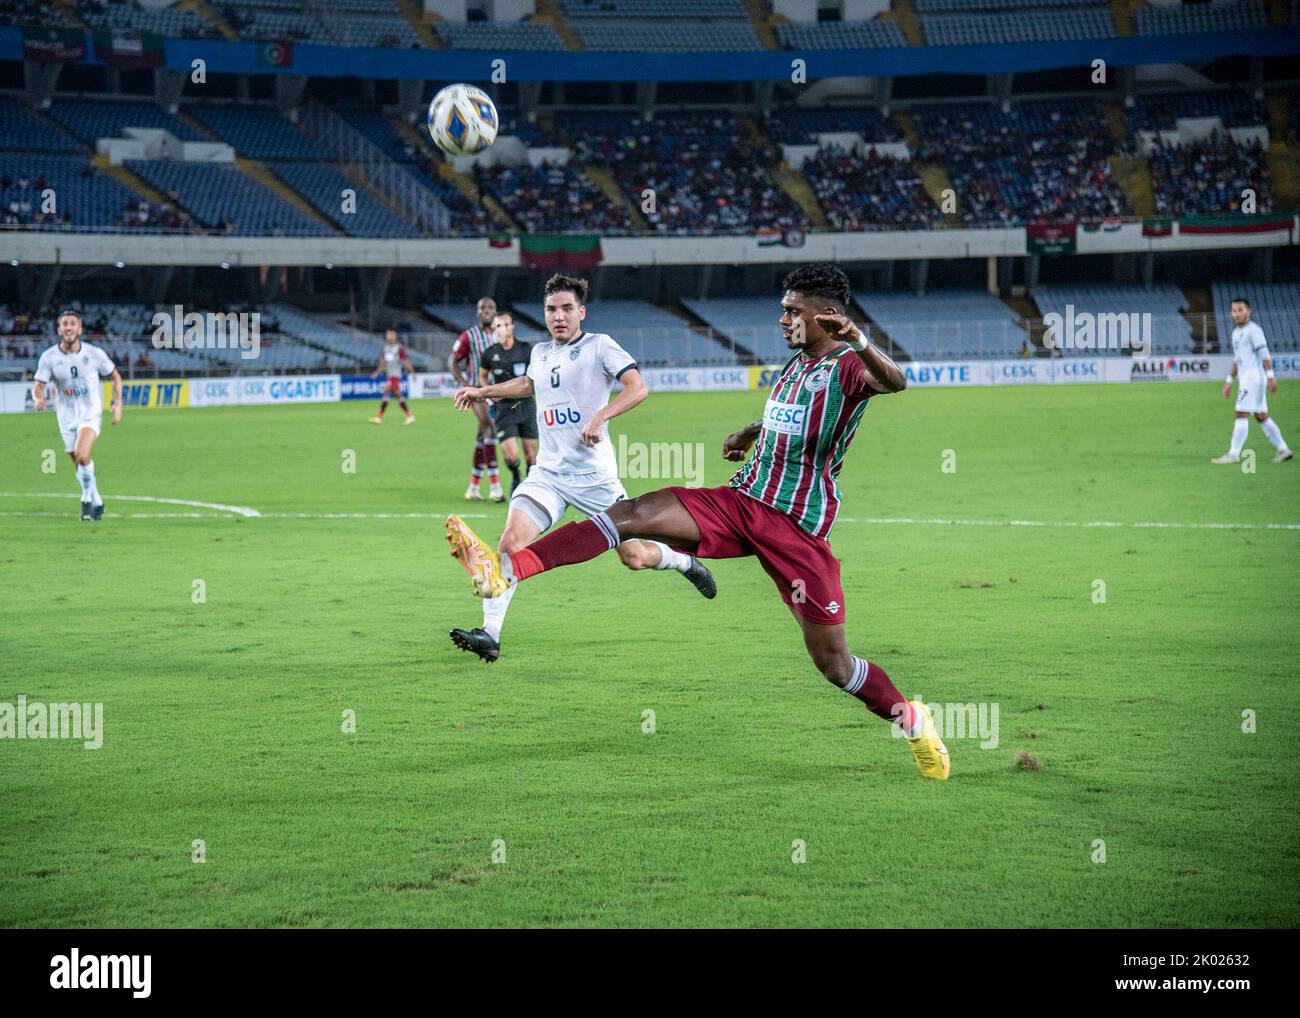 Kolkata, India. 07th Sep, 2022. ATKMB (Mohunbagan Football Club) of Kolkata, India loses to KL City FC (Kuala Lumpur City Football Club) of Kuala lumper, Malaysia by 1-3 margin on AFC Cup-2022 Inter-Zonal Semifinal at VYBK, SALT LAKE STADIUM, Kolkata, India on 7th Sep, 2022. Paulo Josue (60'), Fakrul Aiman Sidid (92') and Romel Morales (95') scored the goals for the visitors while Fardin Ali Molla (90') netted the solitary goal for the Indian Super League club. (Photo by Amlan Biswas/Pacific Press) Credit: Pacific Press Media Production Corp./Alamy Live News Stock Photo